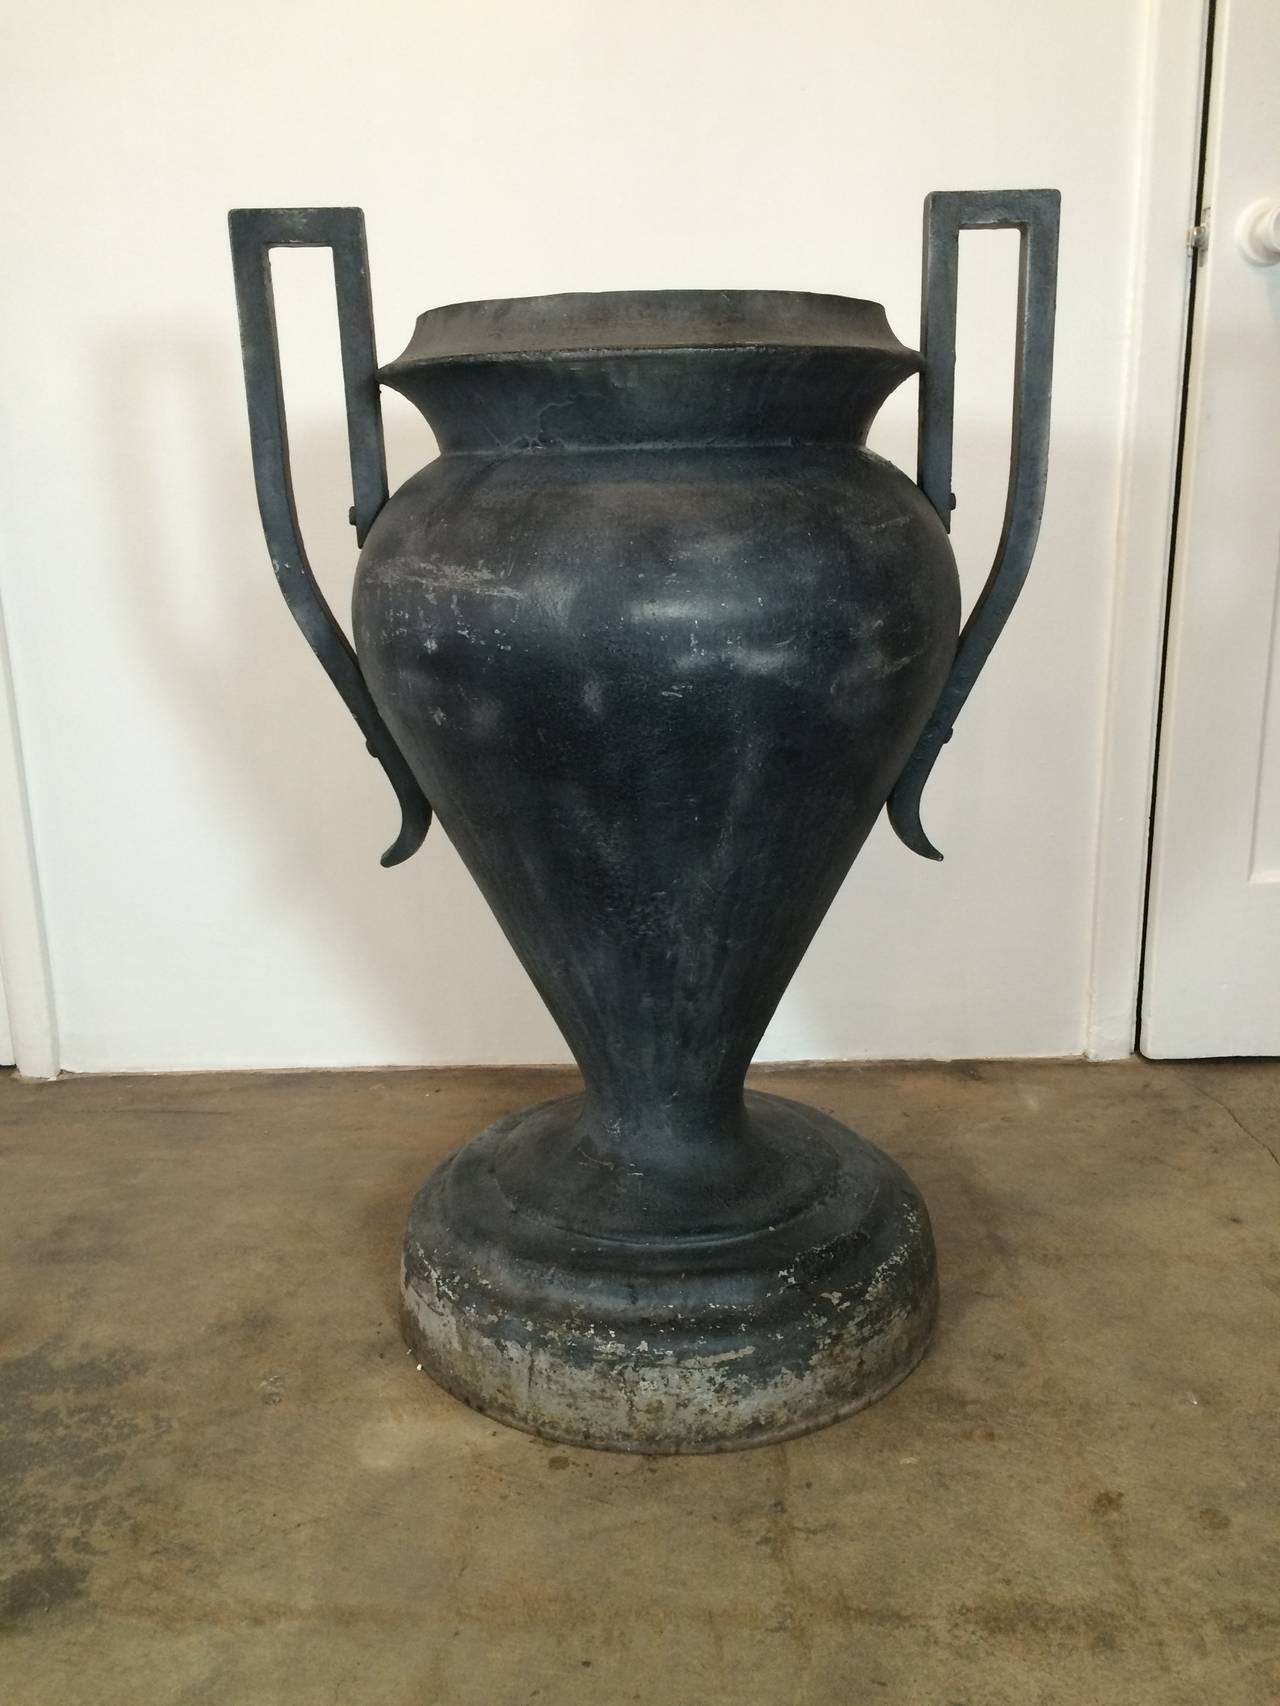 Very large iron urn, excellent for an entryway or garden. Very heavy, very solid.